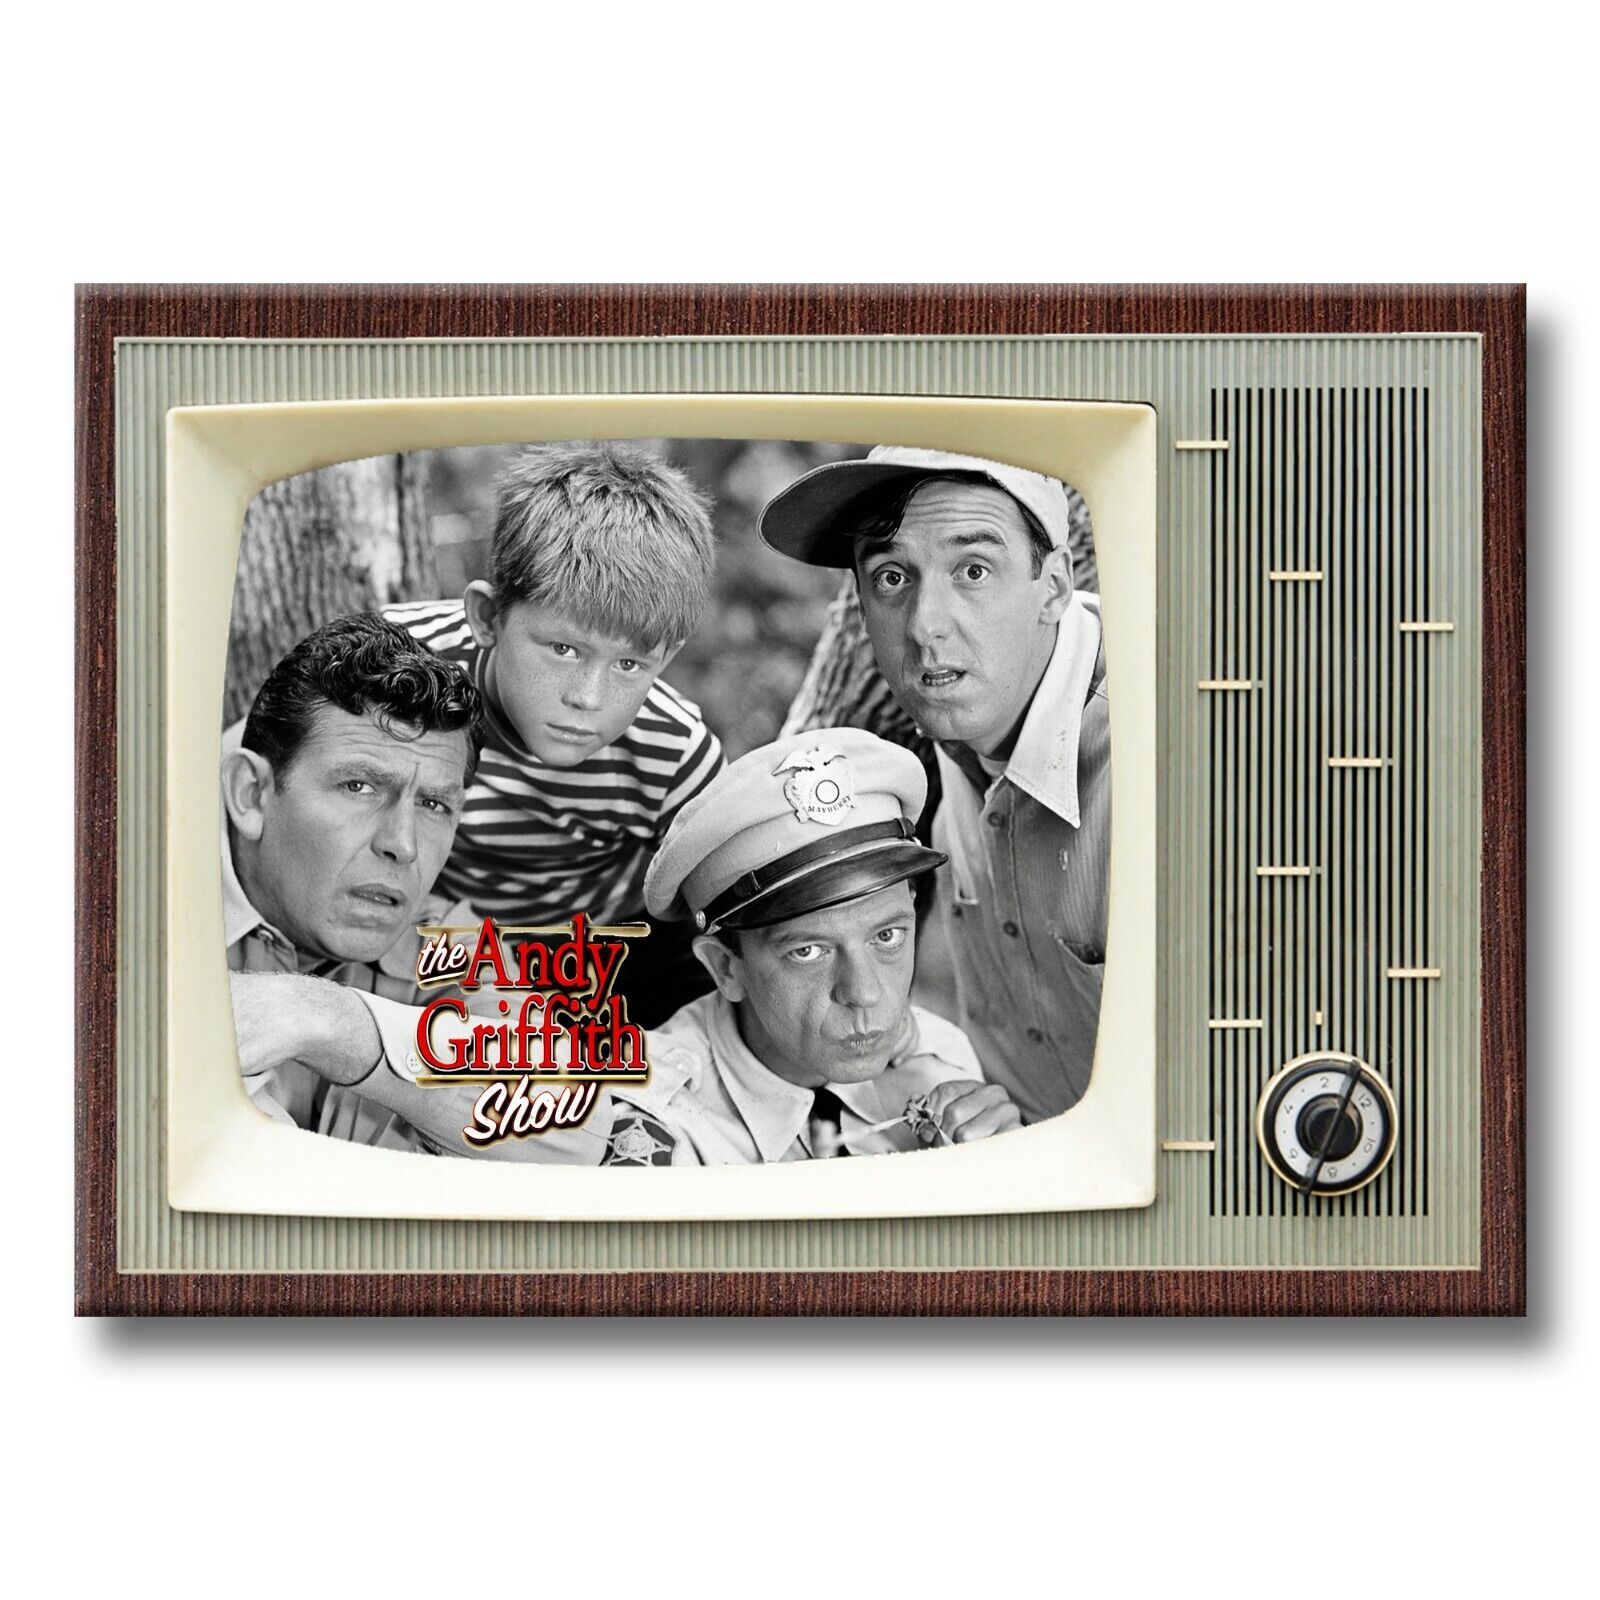 THE ANDY GRIFFITH SHOW Classic TV 3.5 inches x 2.5 inches Steel FRIDGE MAGNET